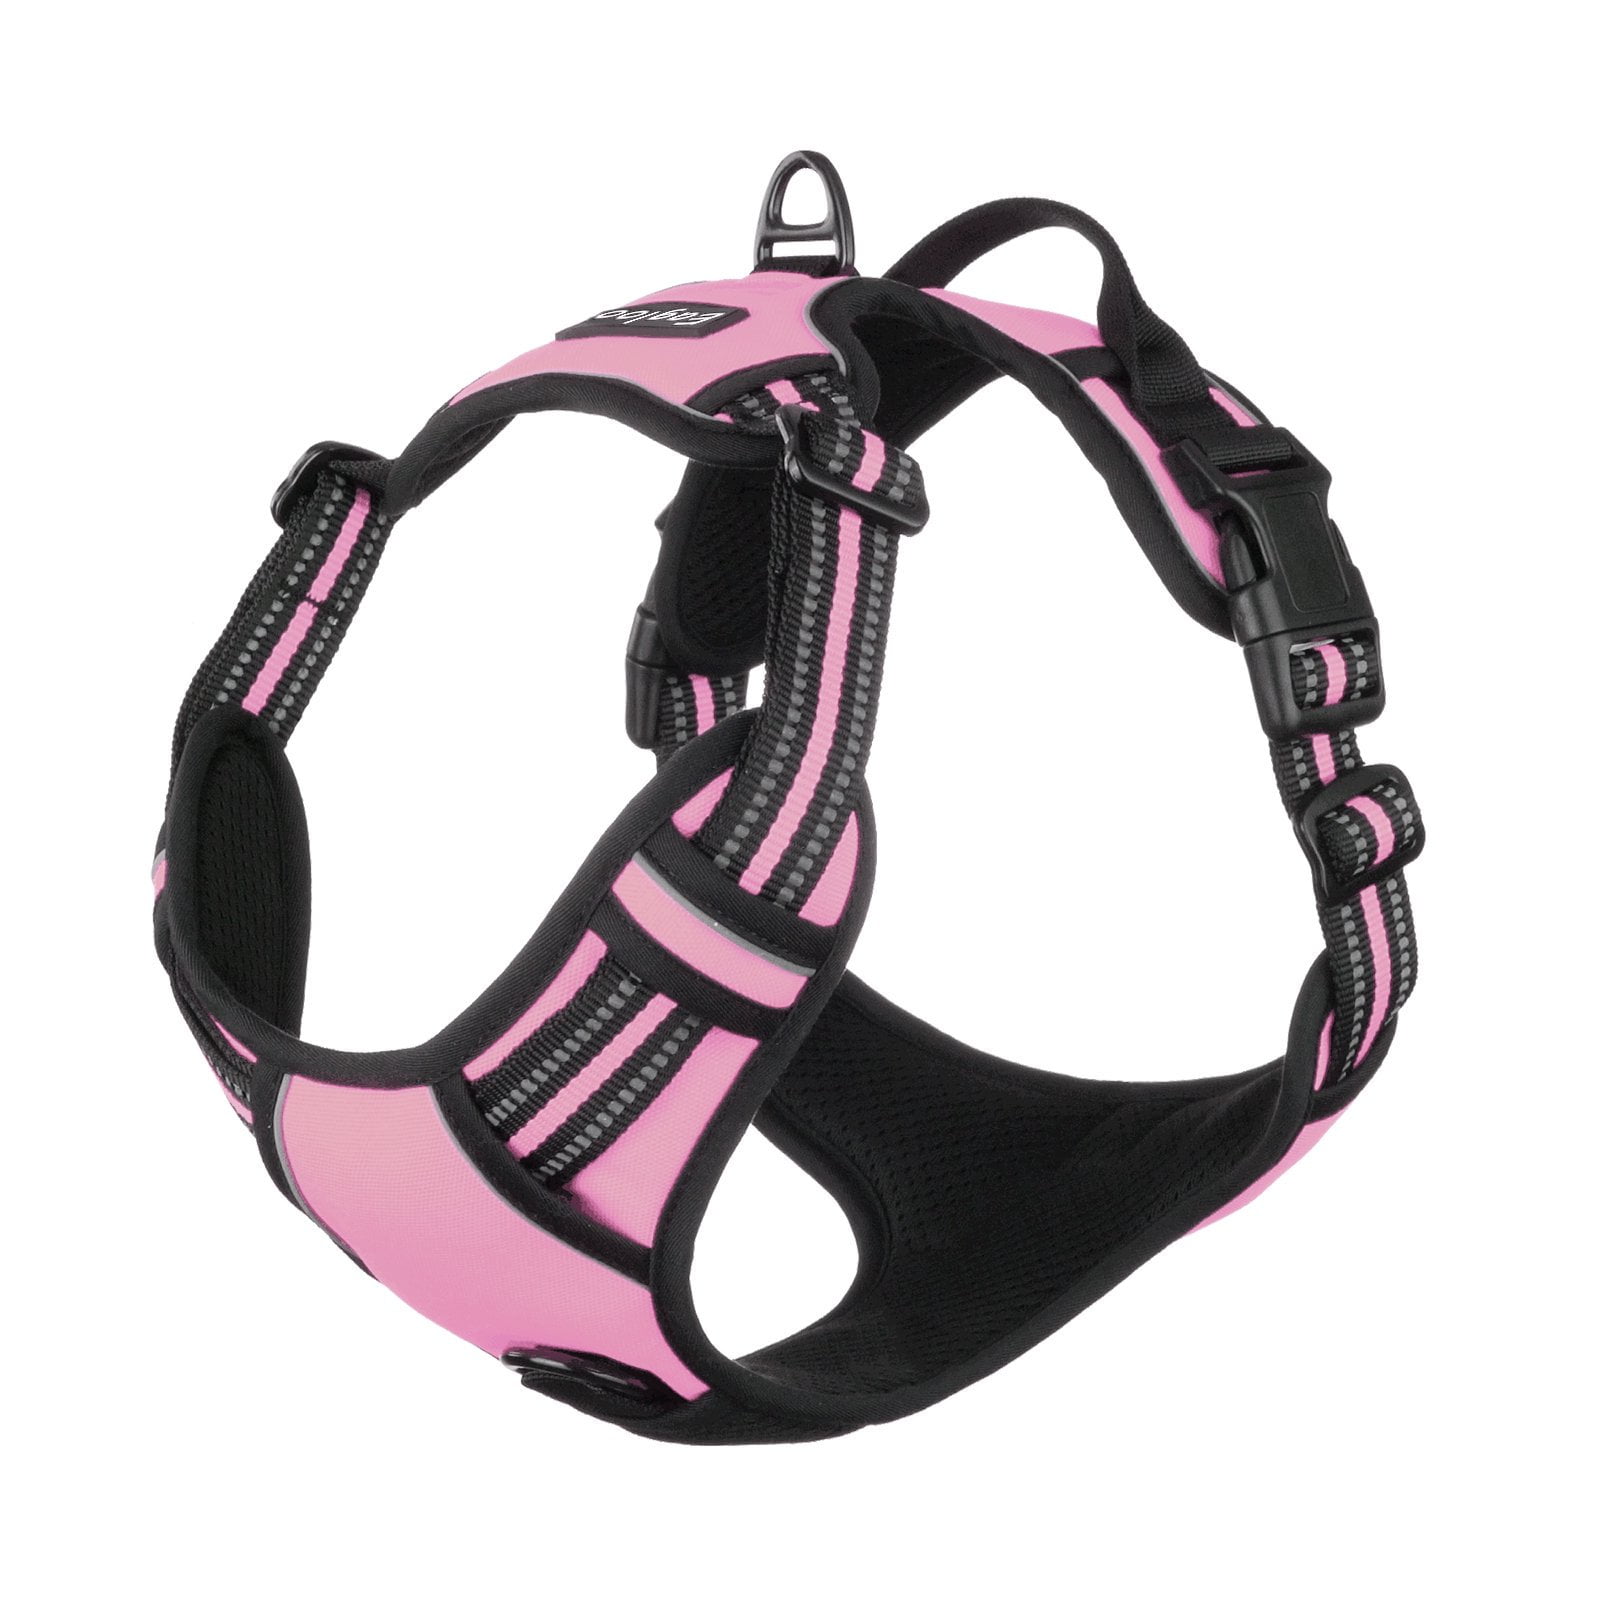  ComfortFlex Sport Harness - American Made No Pull Dog Harness  for Small, Medium, Large Dogs - Padded, Reflective No Rub Harness for  Walking & Running - Small/Medium, Hot Pink 